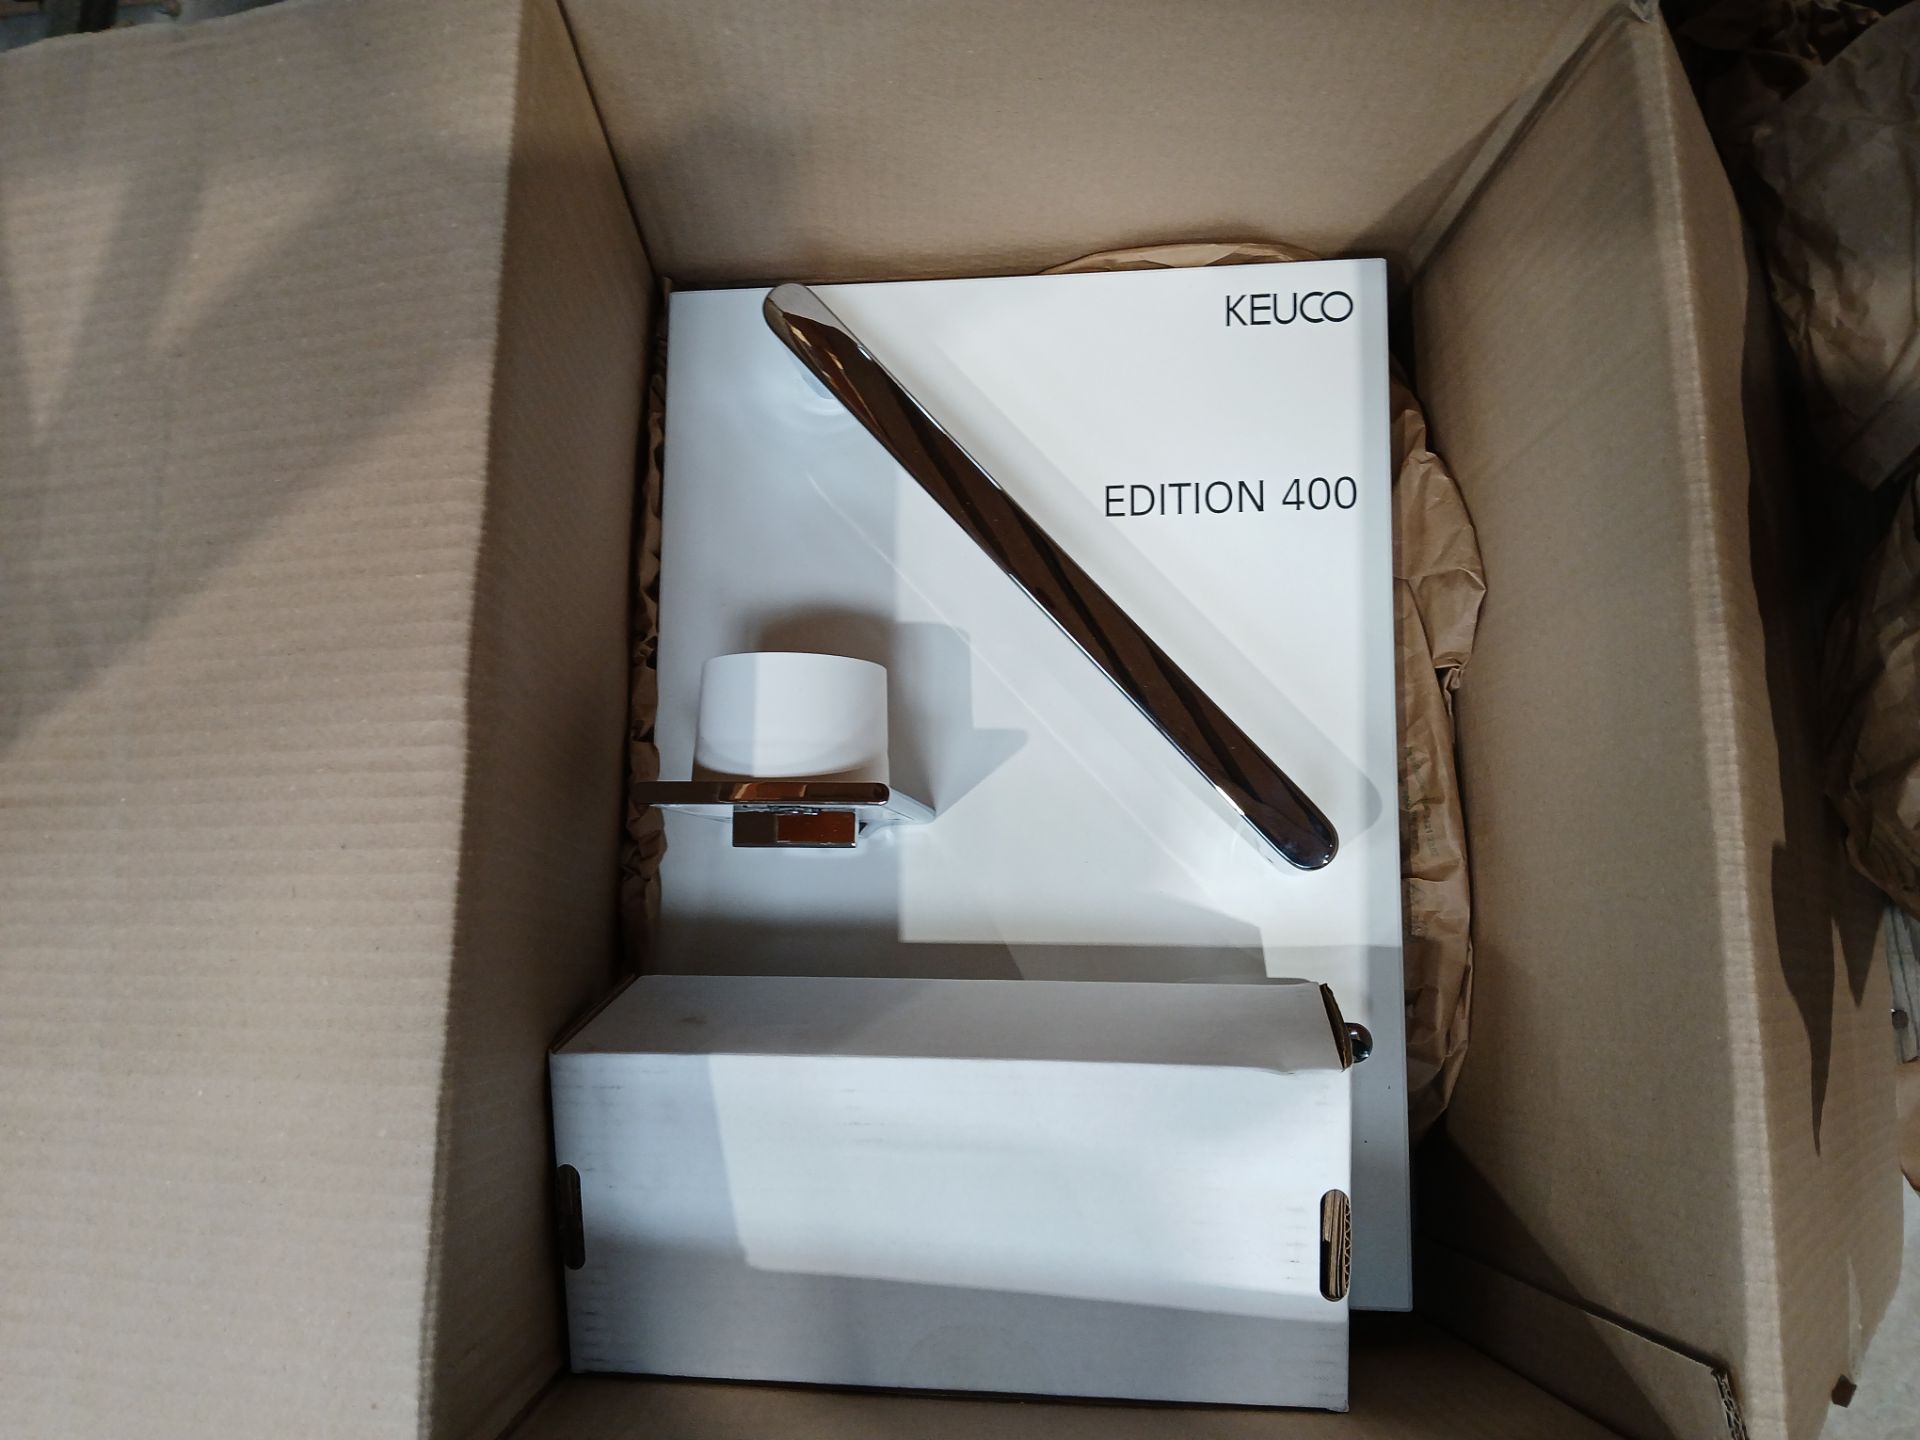 11 x Keuco bathroom accessorize packages (for showroom purposes)